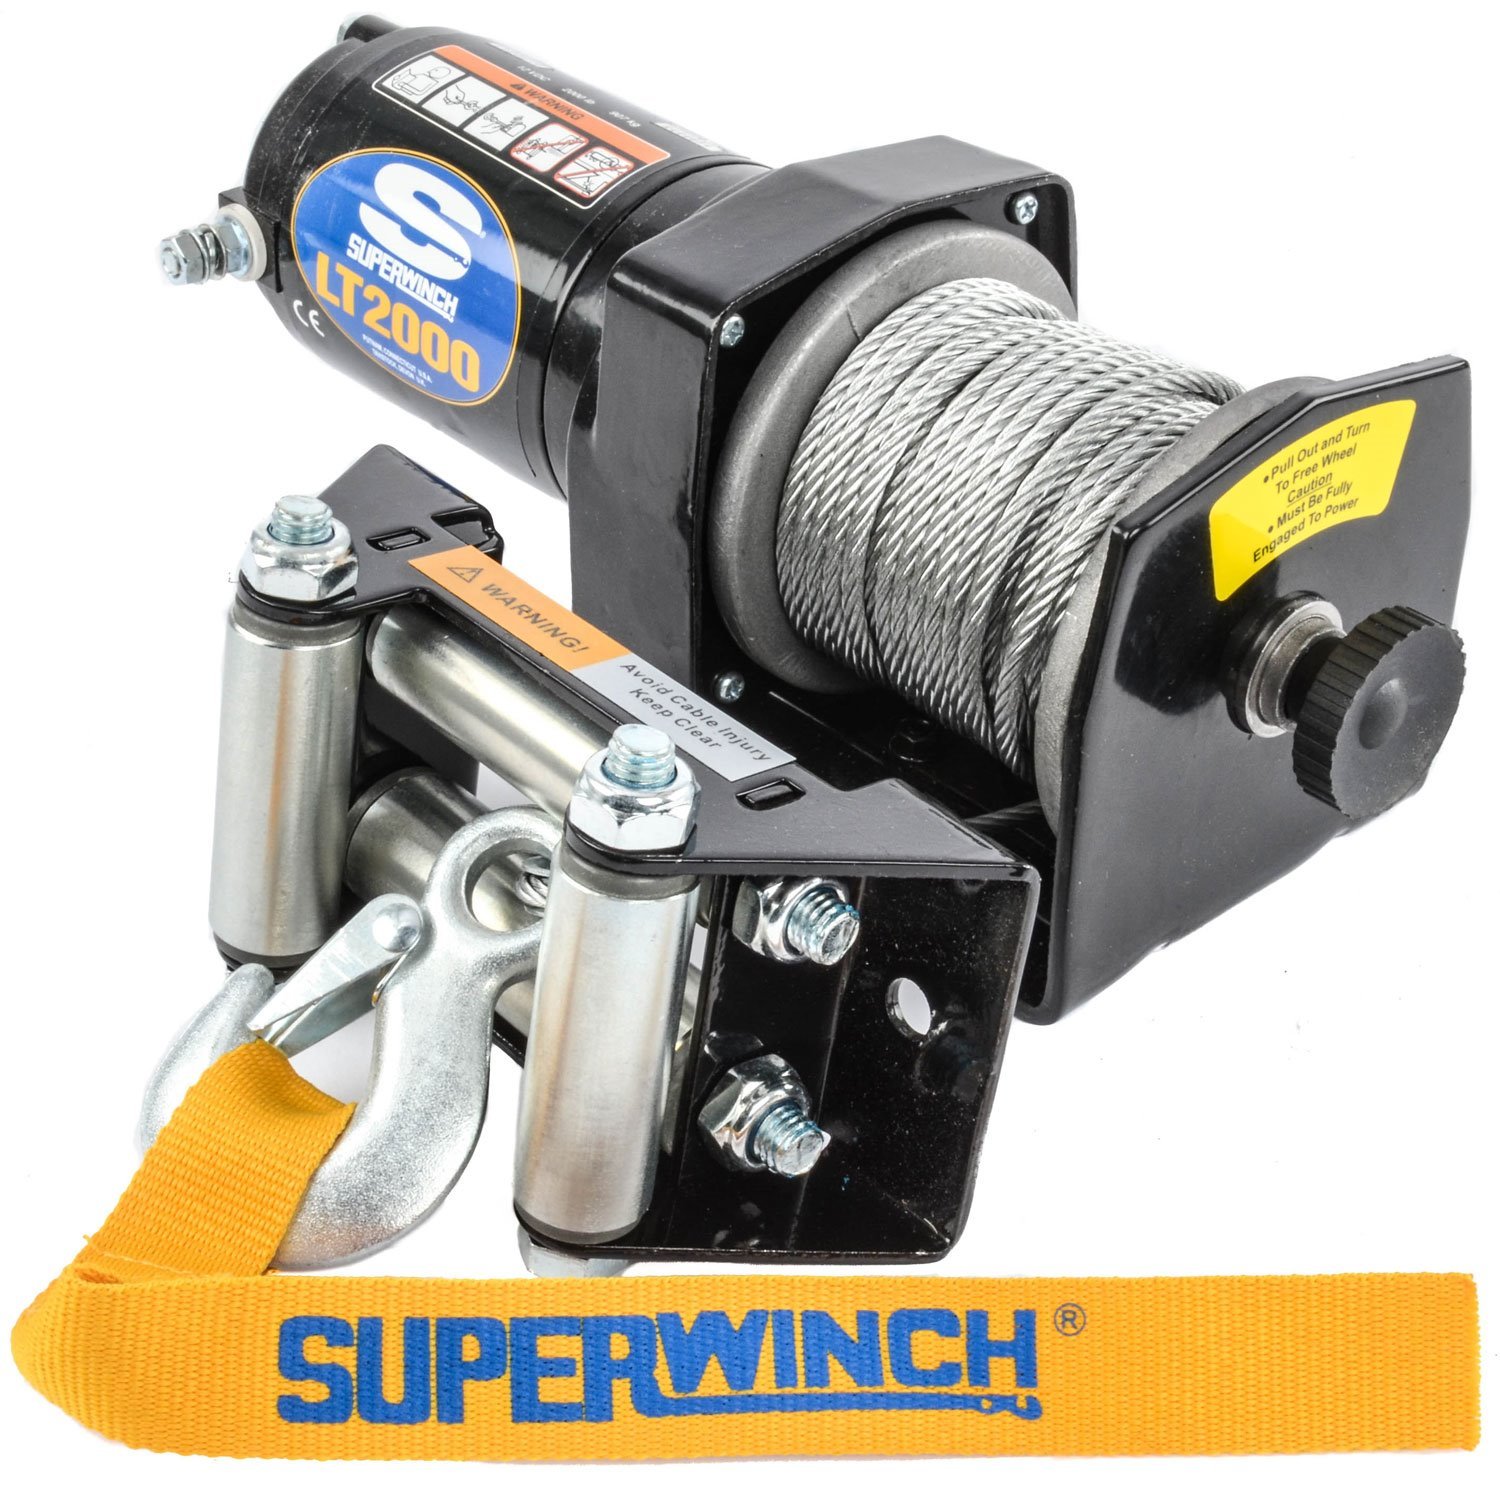 LT2000 ATV Winch 1.0 HP Motor Rate Line Pull: 2,000-lbs. Gear Ratio: 153:1 Wire Rope: 5/32" x 50